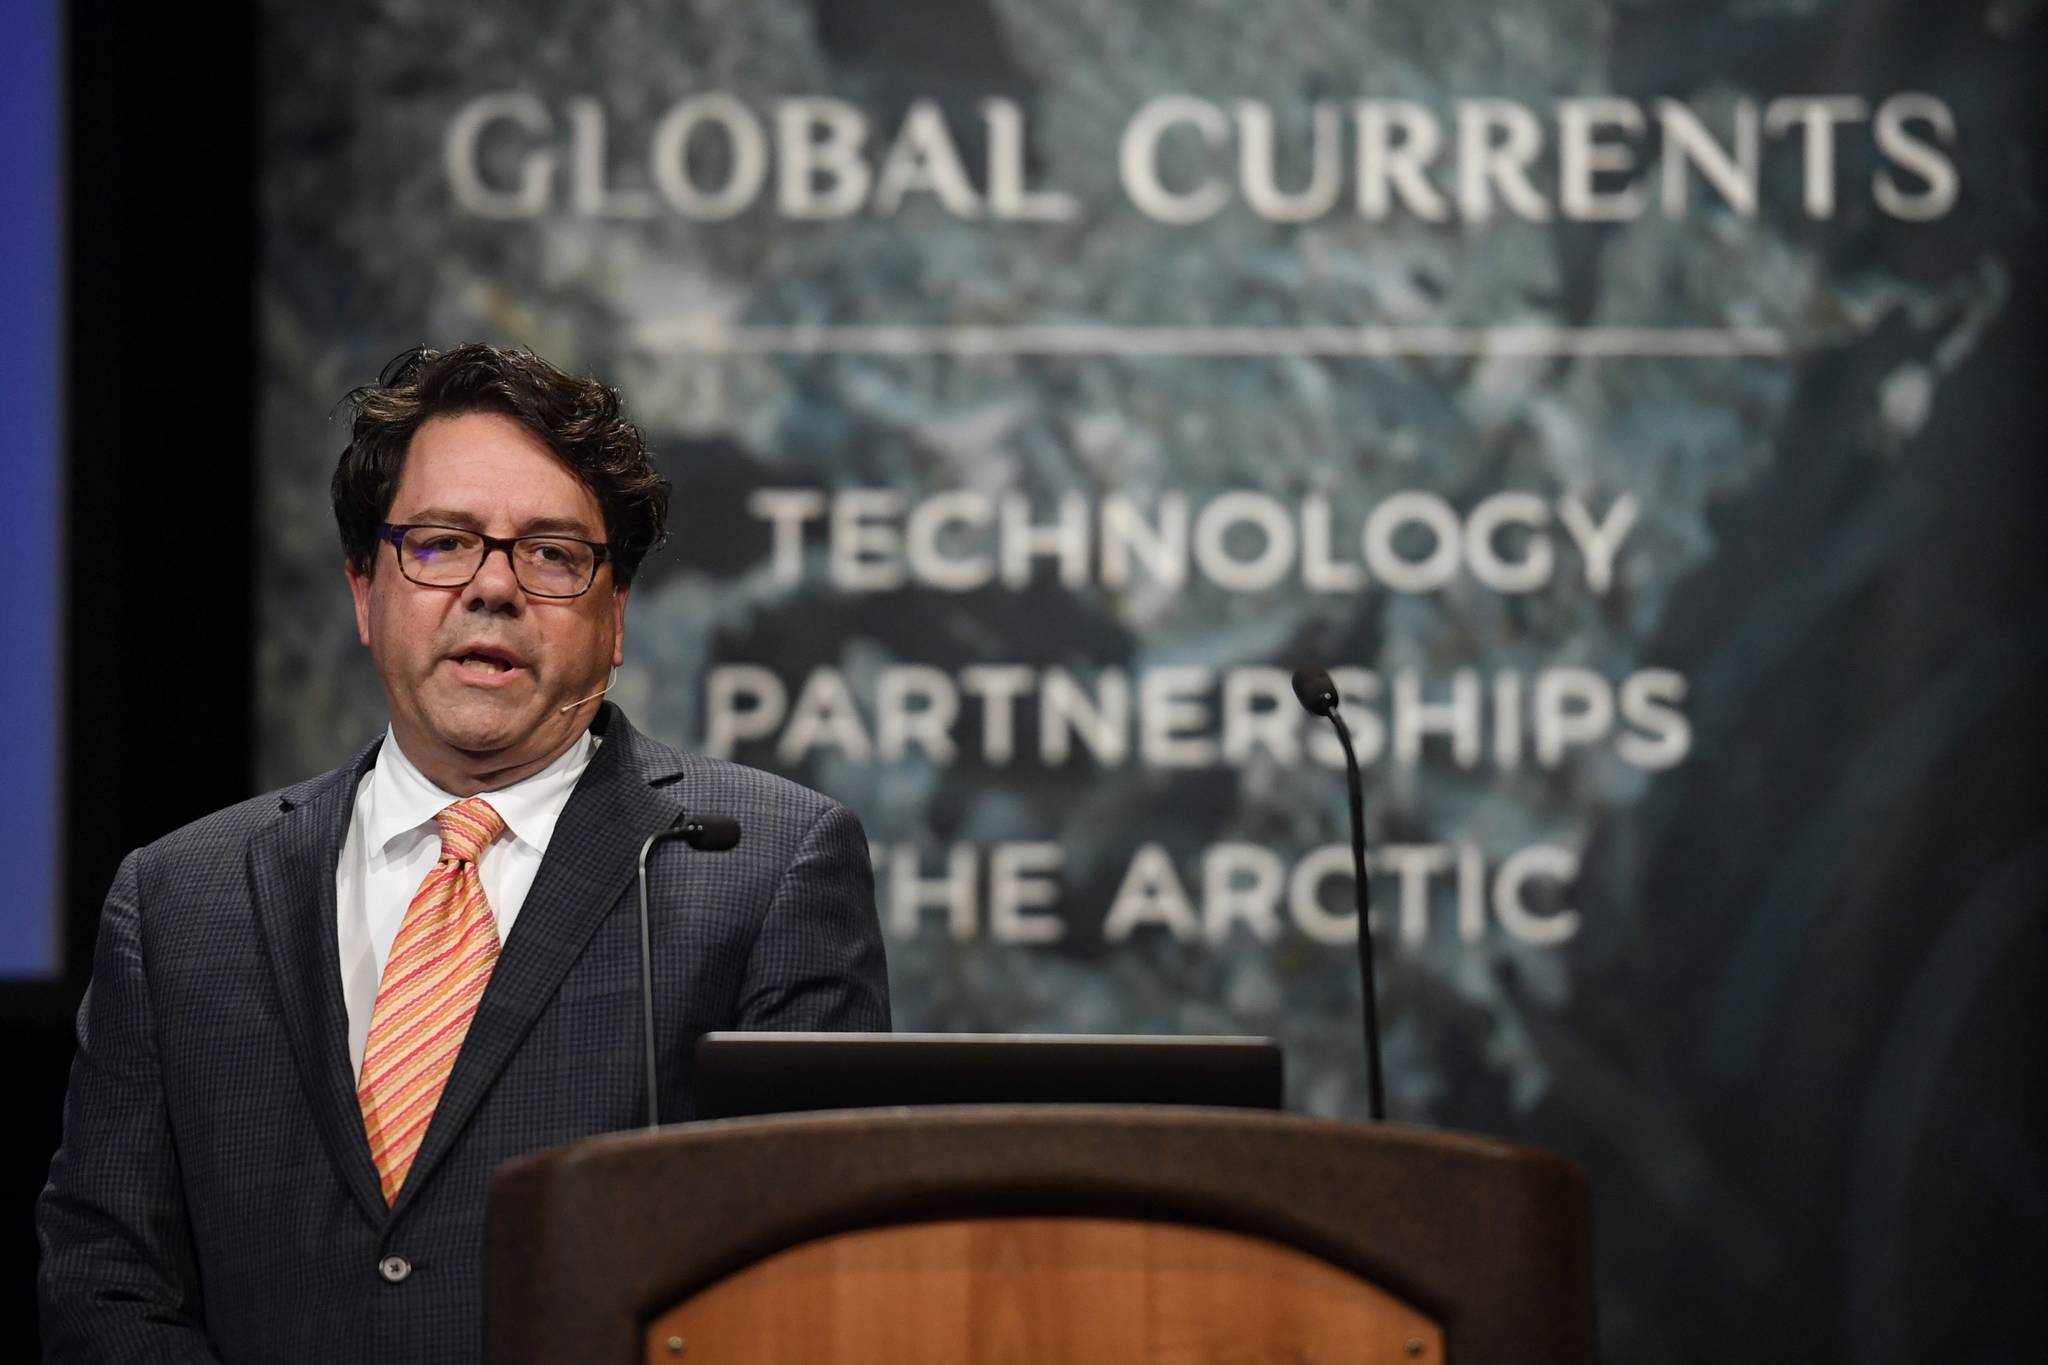 Vincent Pieribone, Vice President of Ocean X, deliveries the keynote speech at the annual meeting of the International Forum of Sovereign Wealth Funds at Centennial Hall on Thursday, Sept. 12, 2019. (Michael Penn | Juneau Empire)